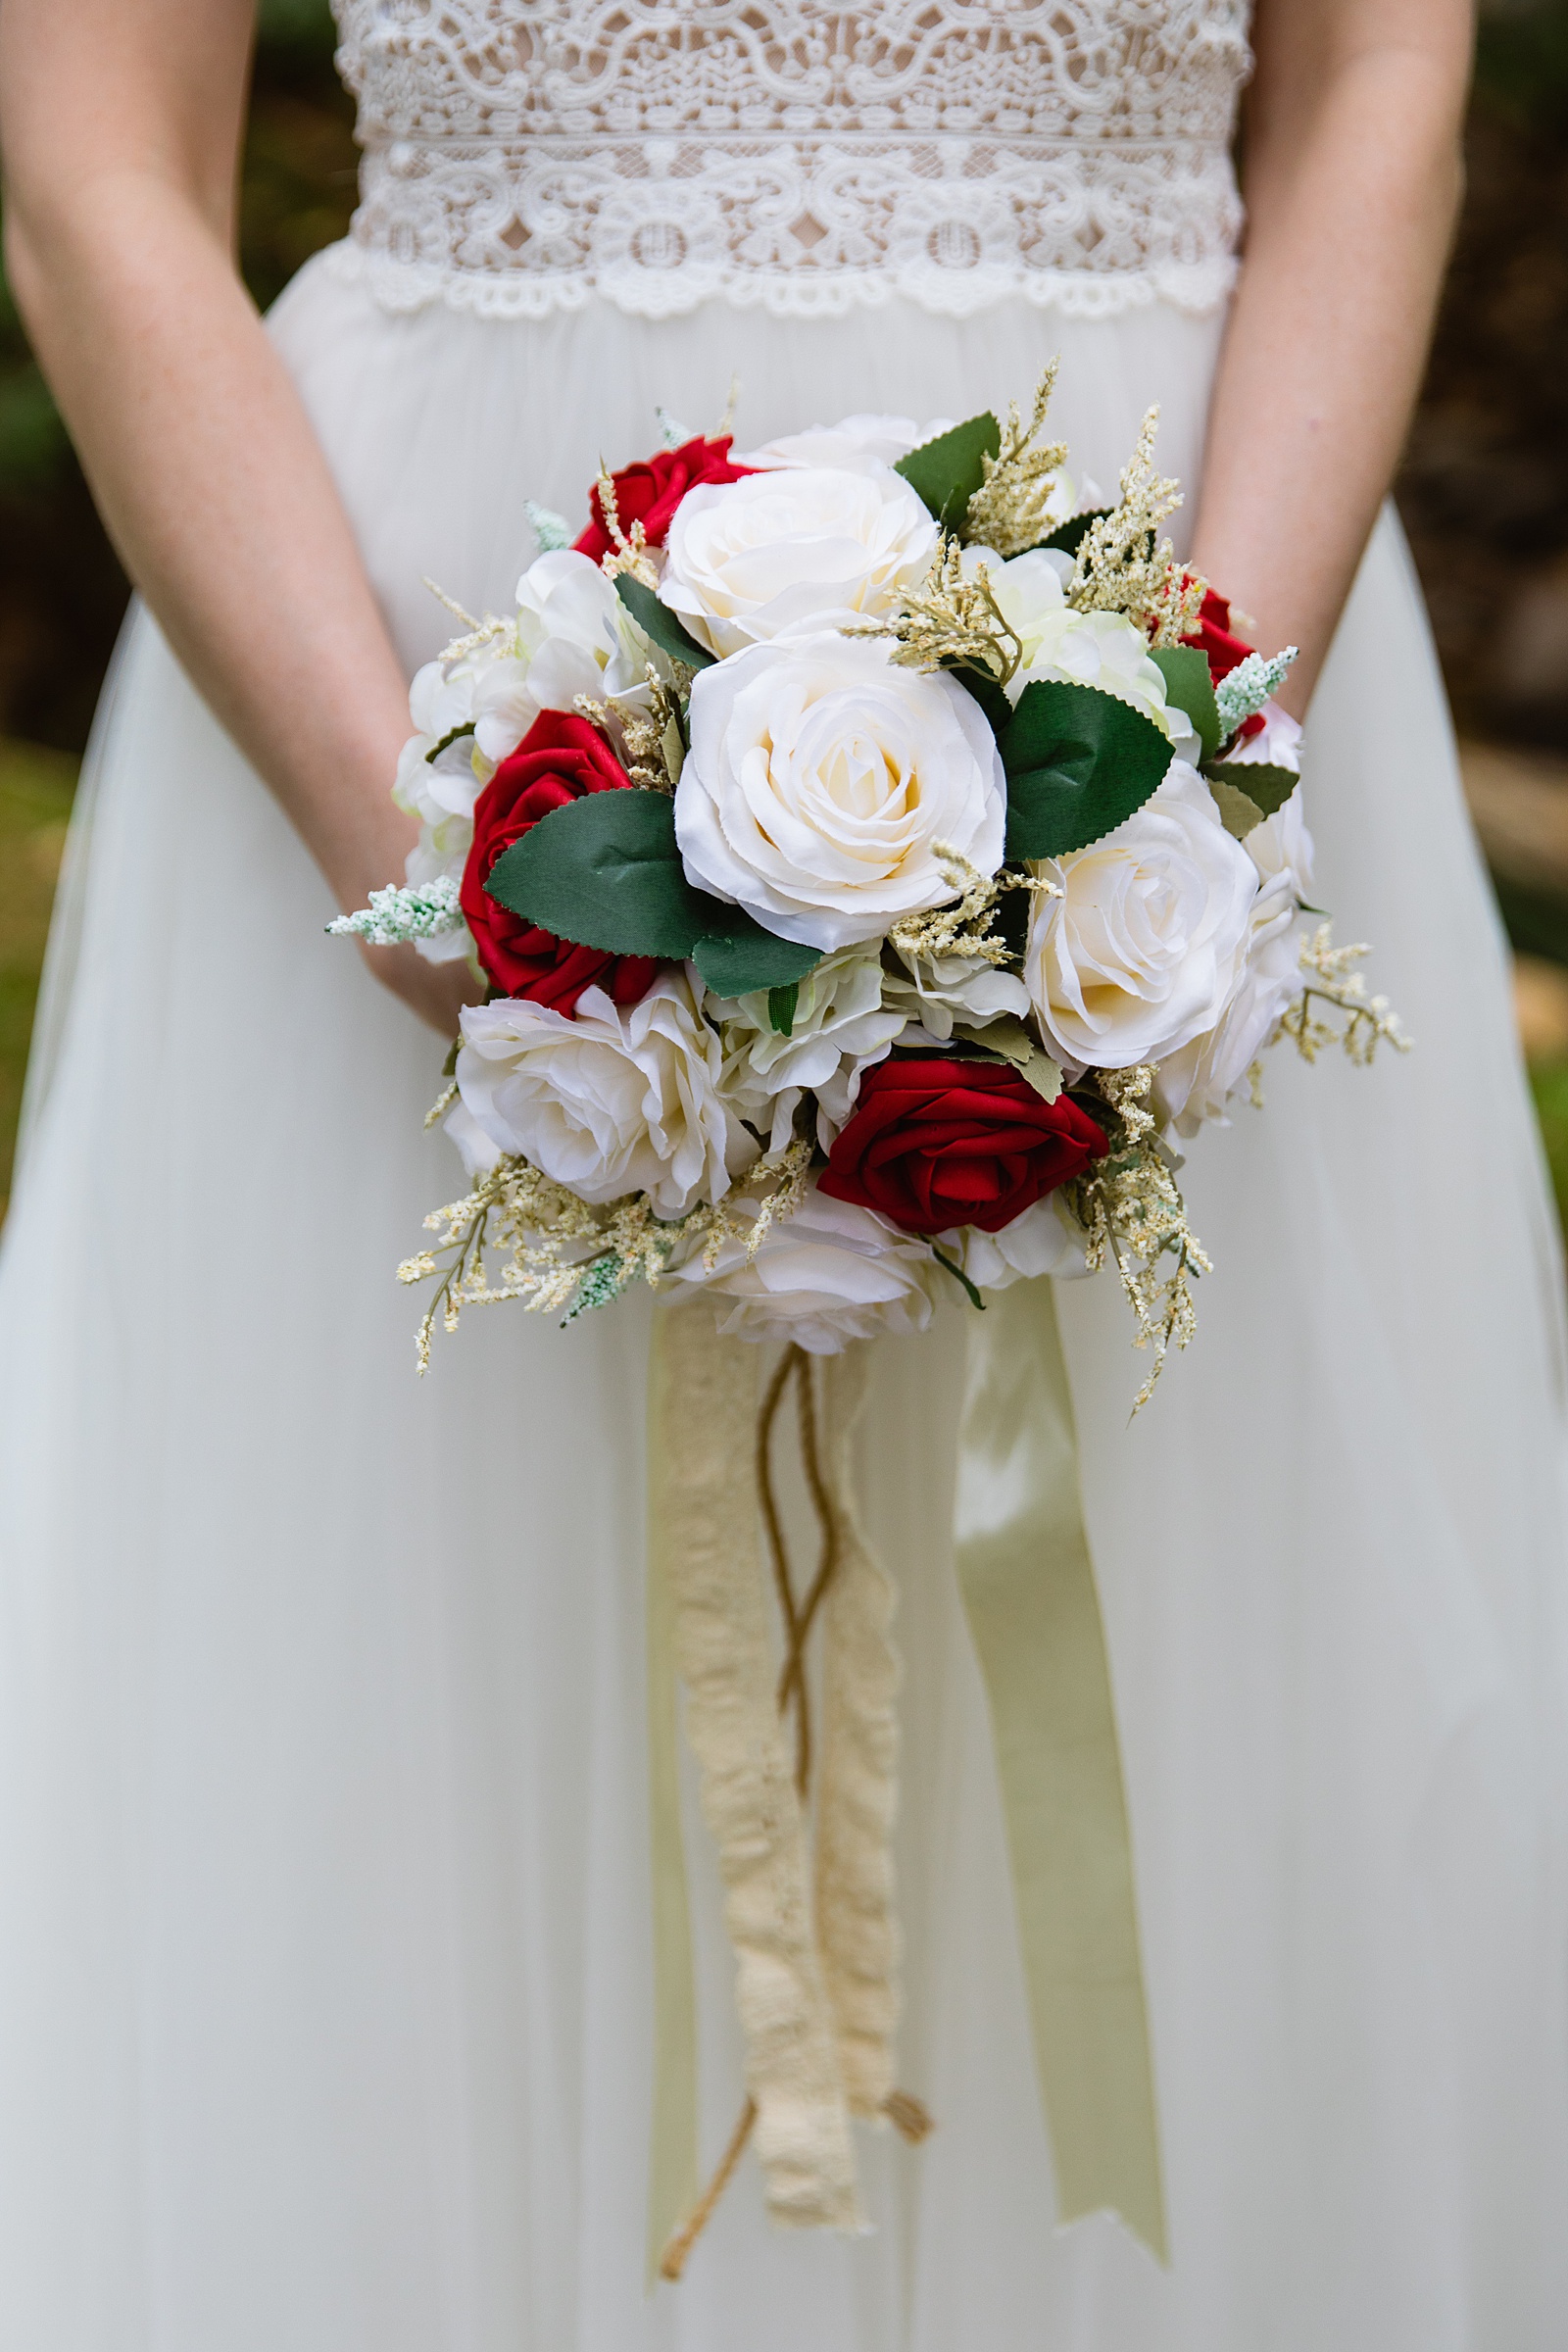 Bride's classic and simple red and white rose bouquet by PMA Photography.